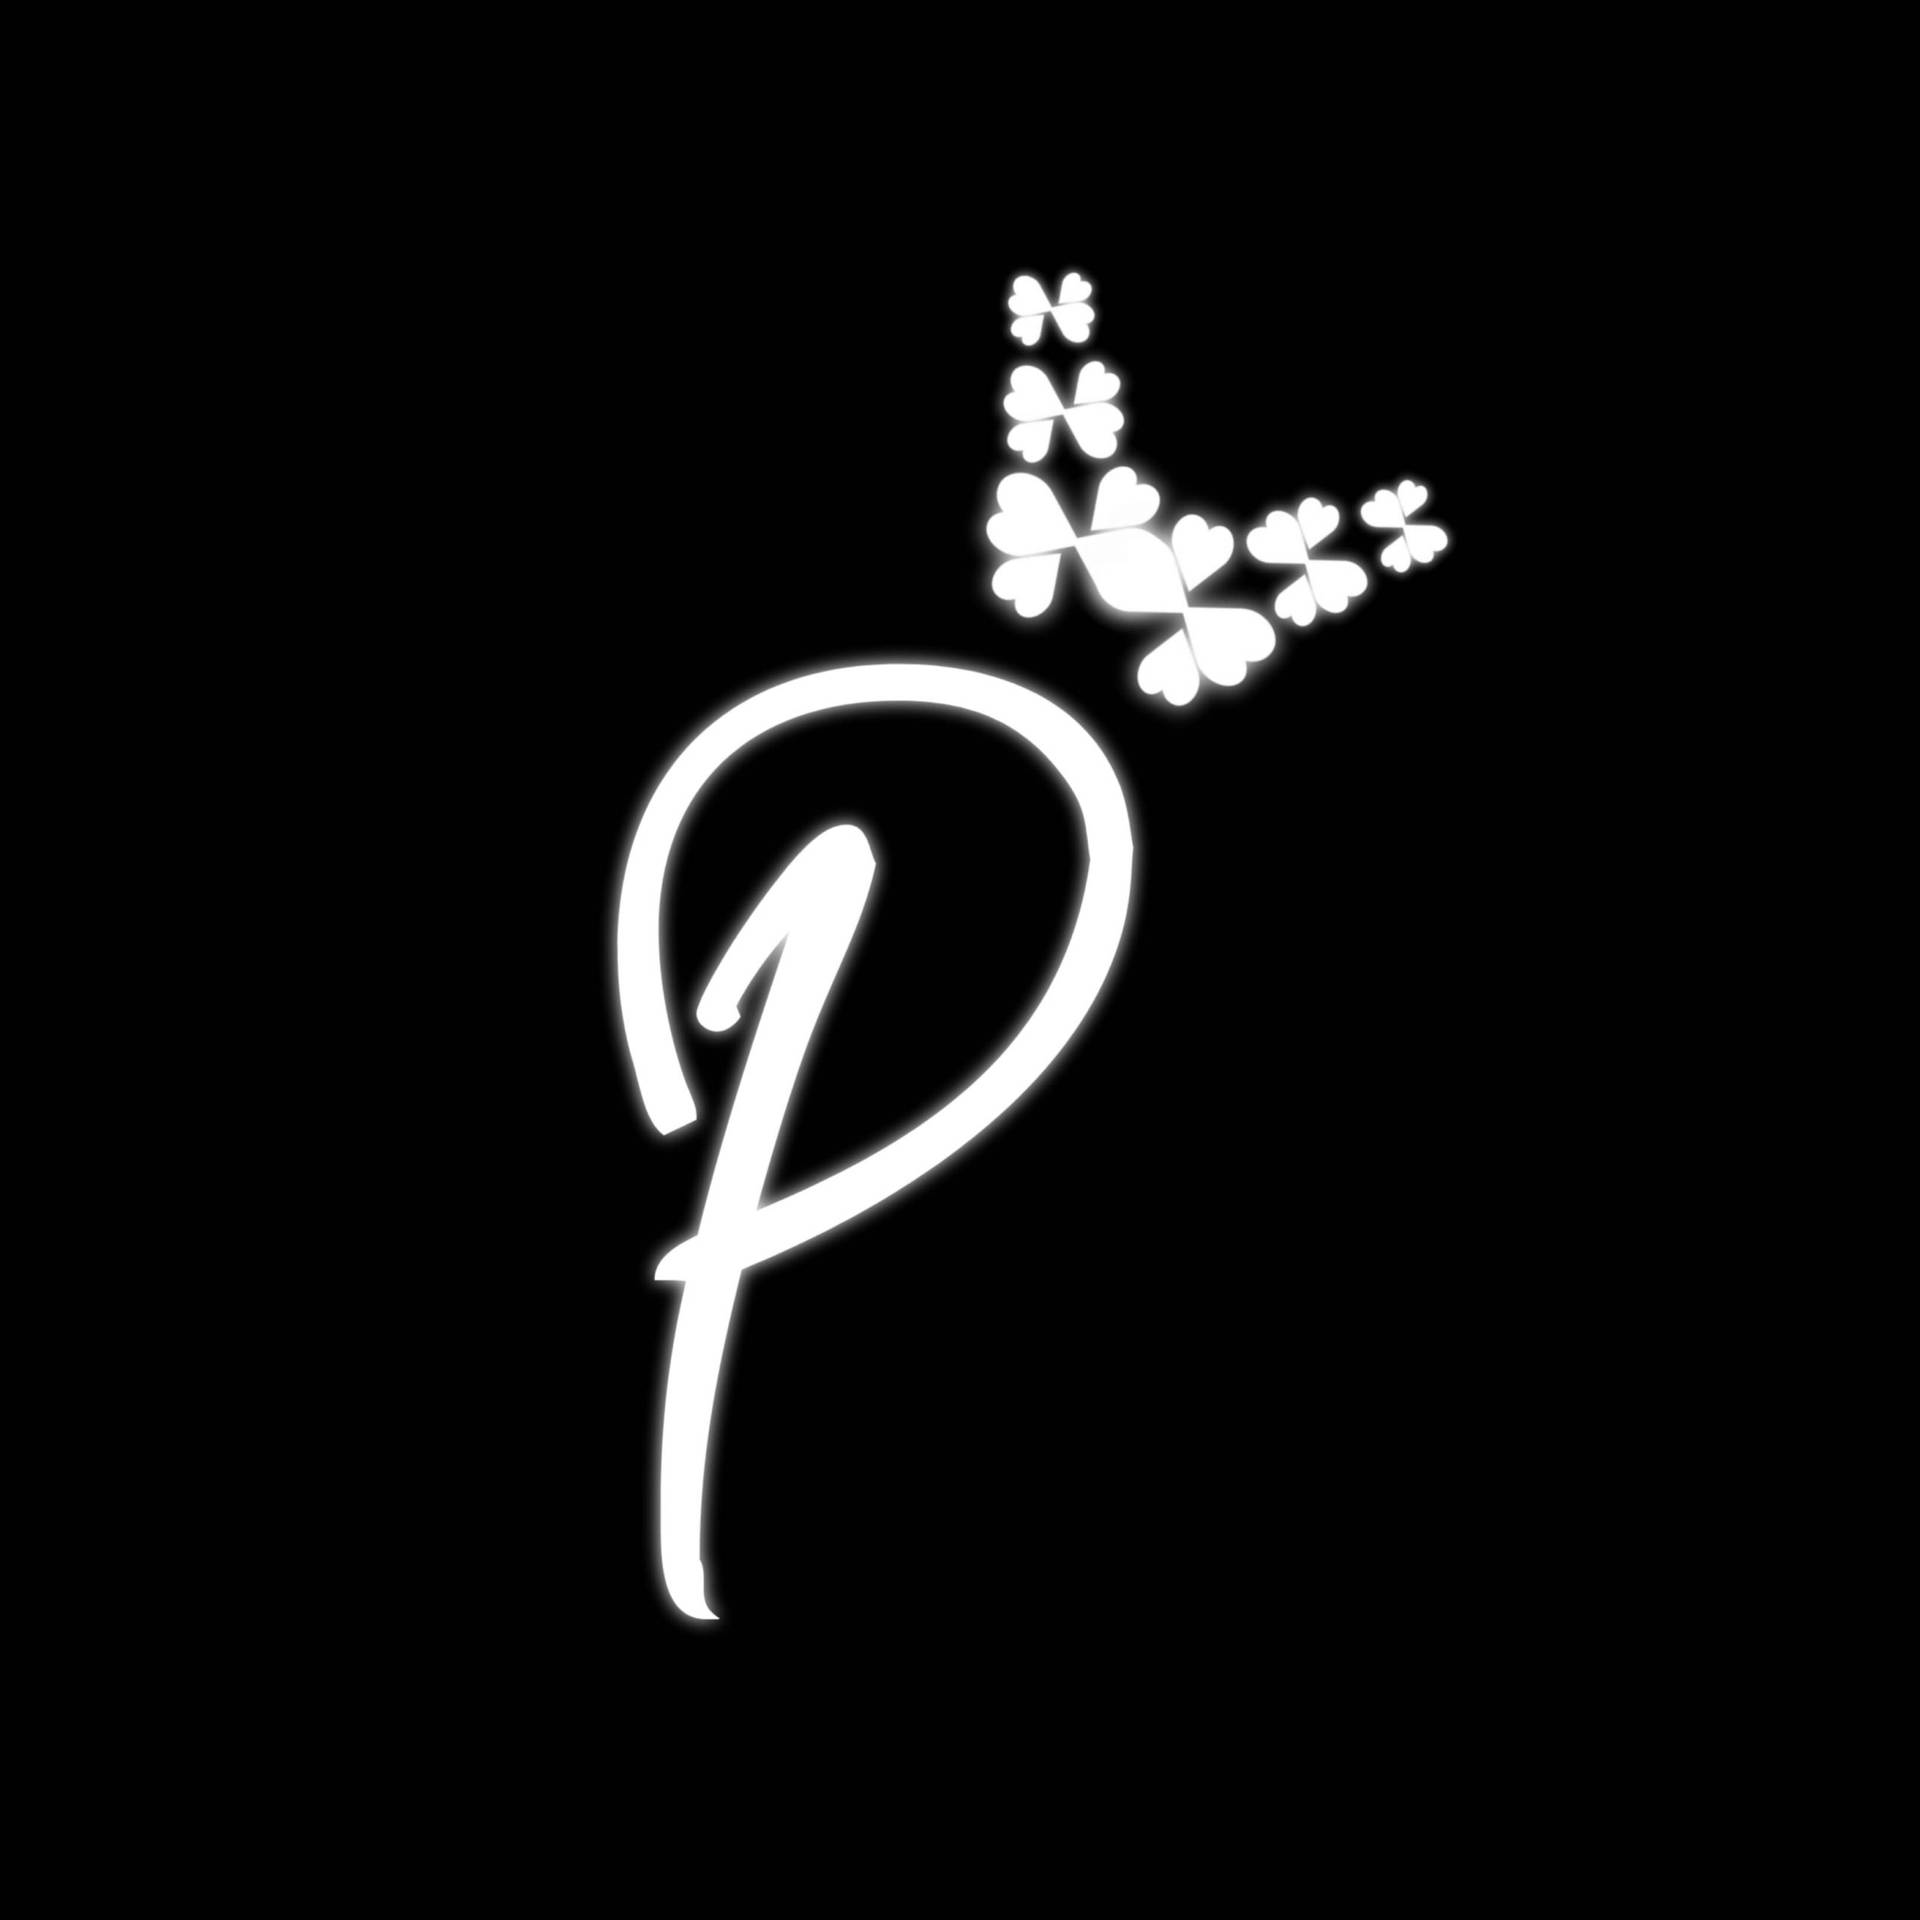 Glowing Letter P